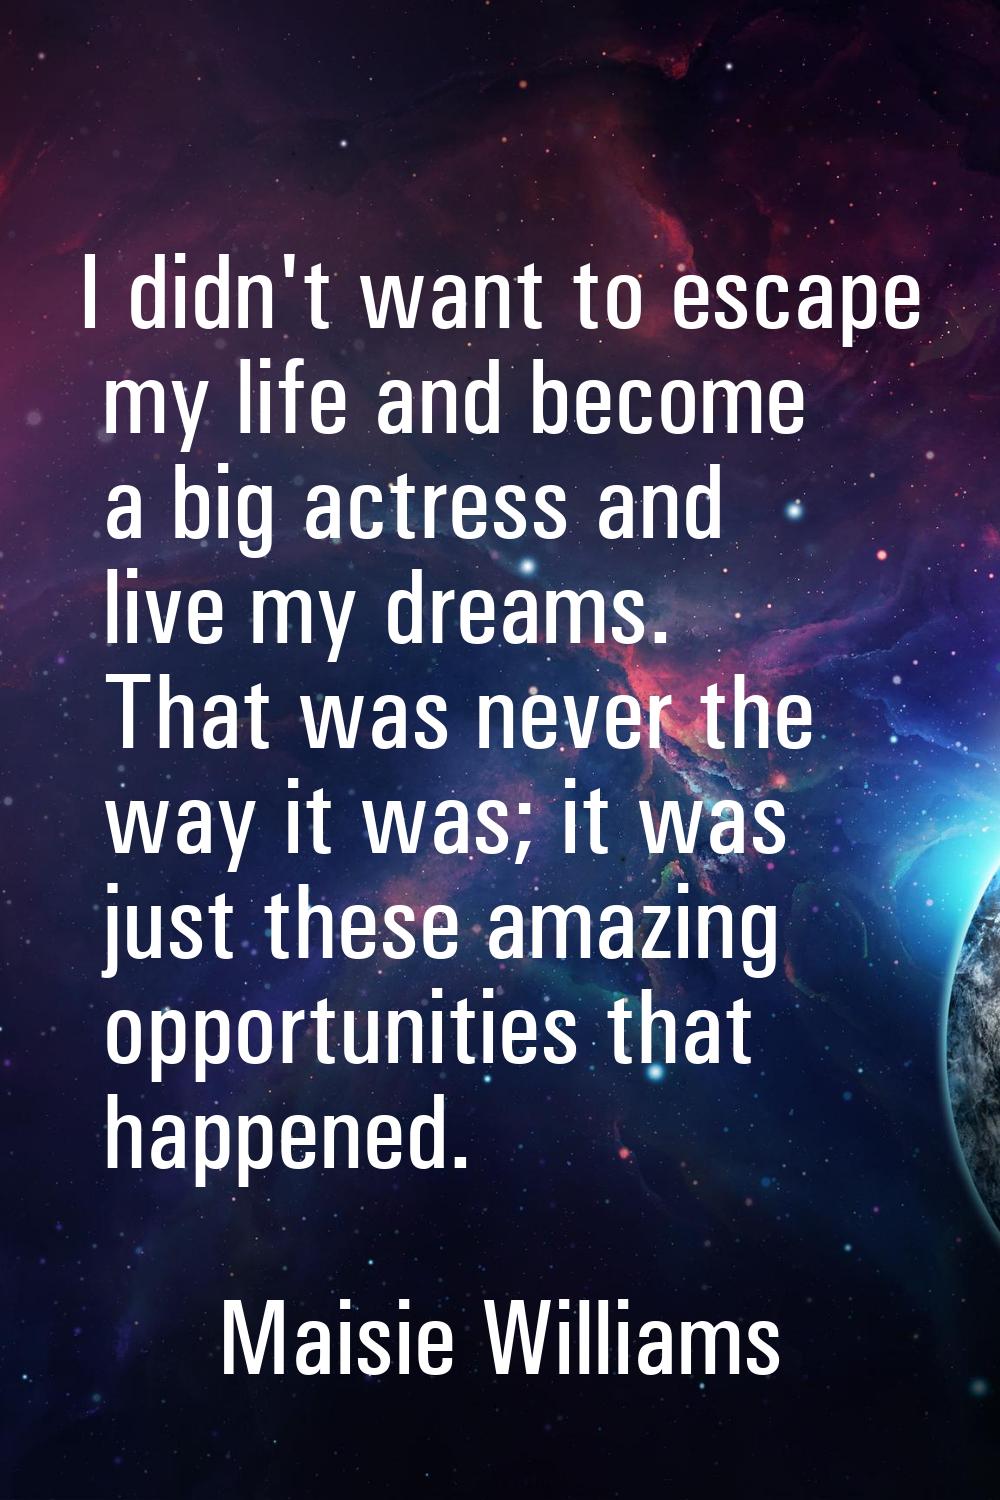 I didn't want to escape my life and become a big actress and live my dreams. That was never the way